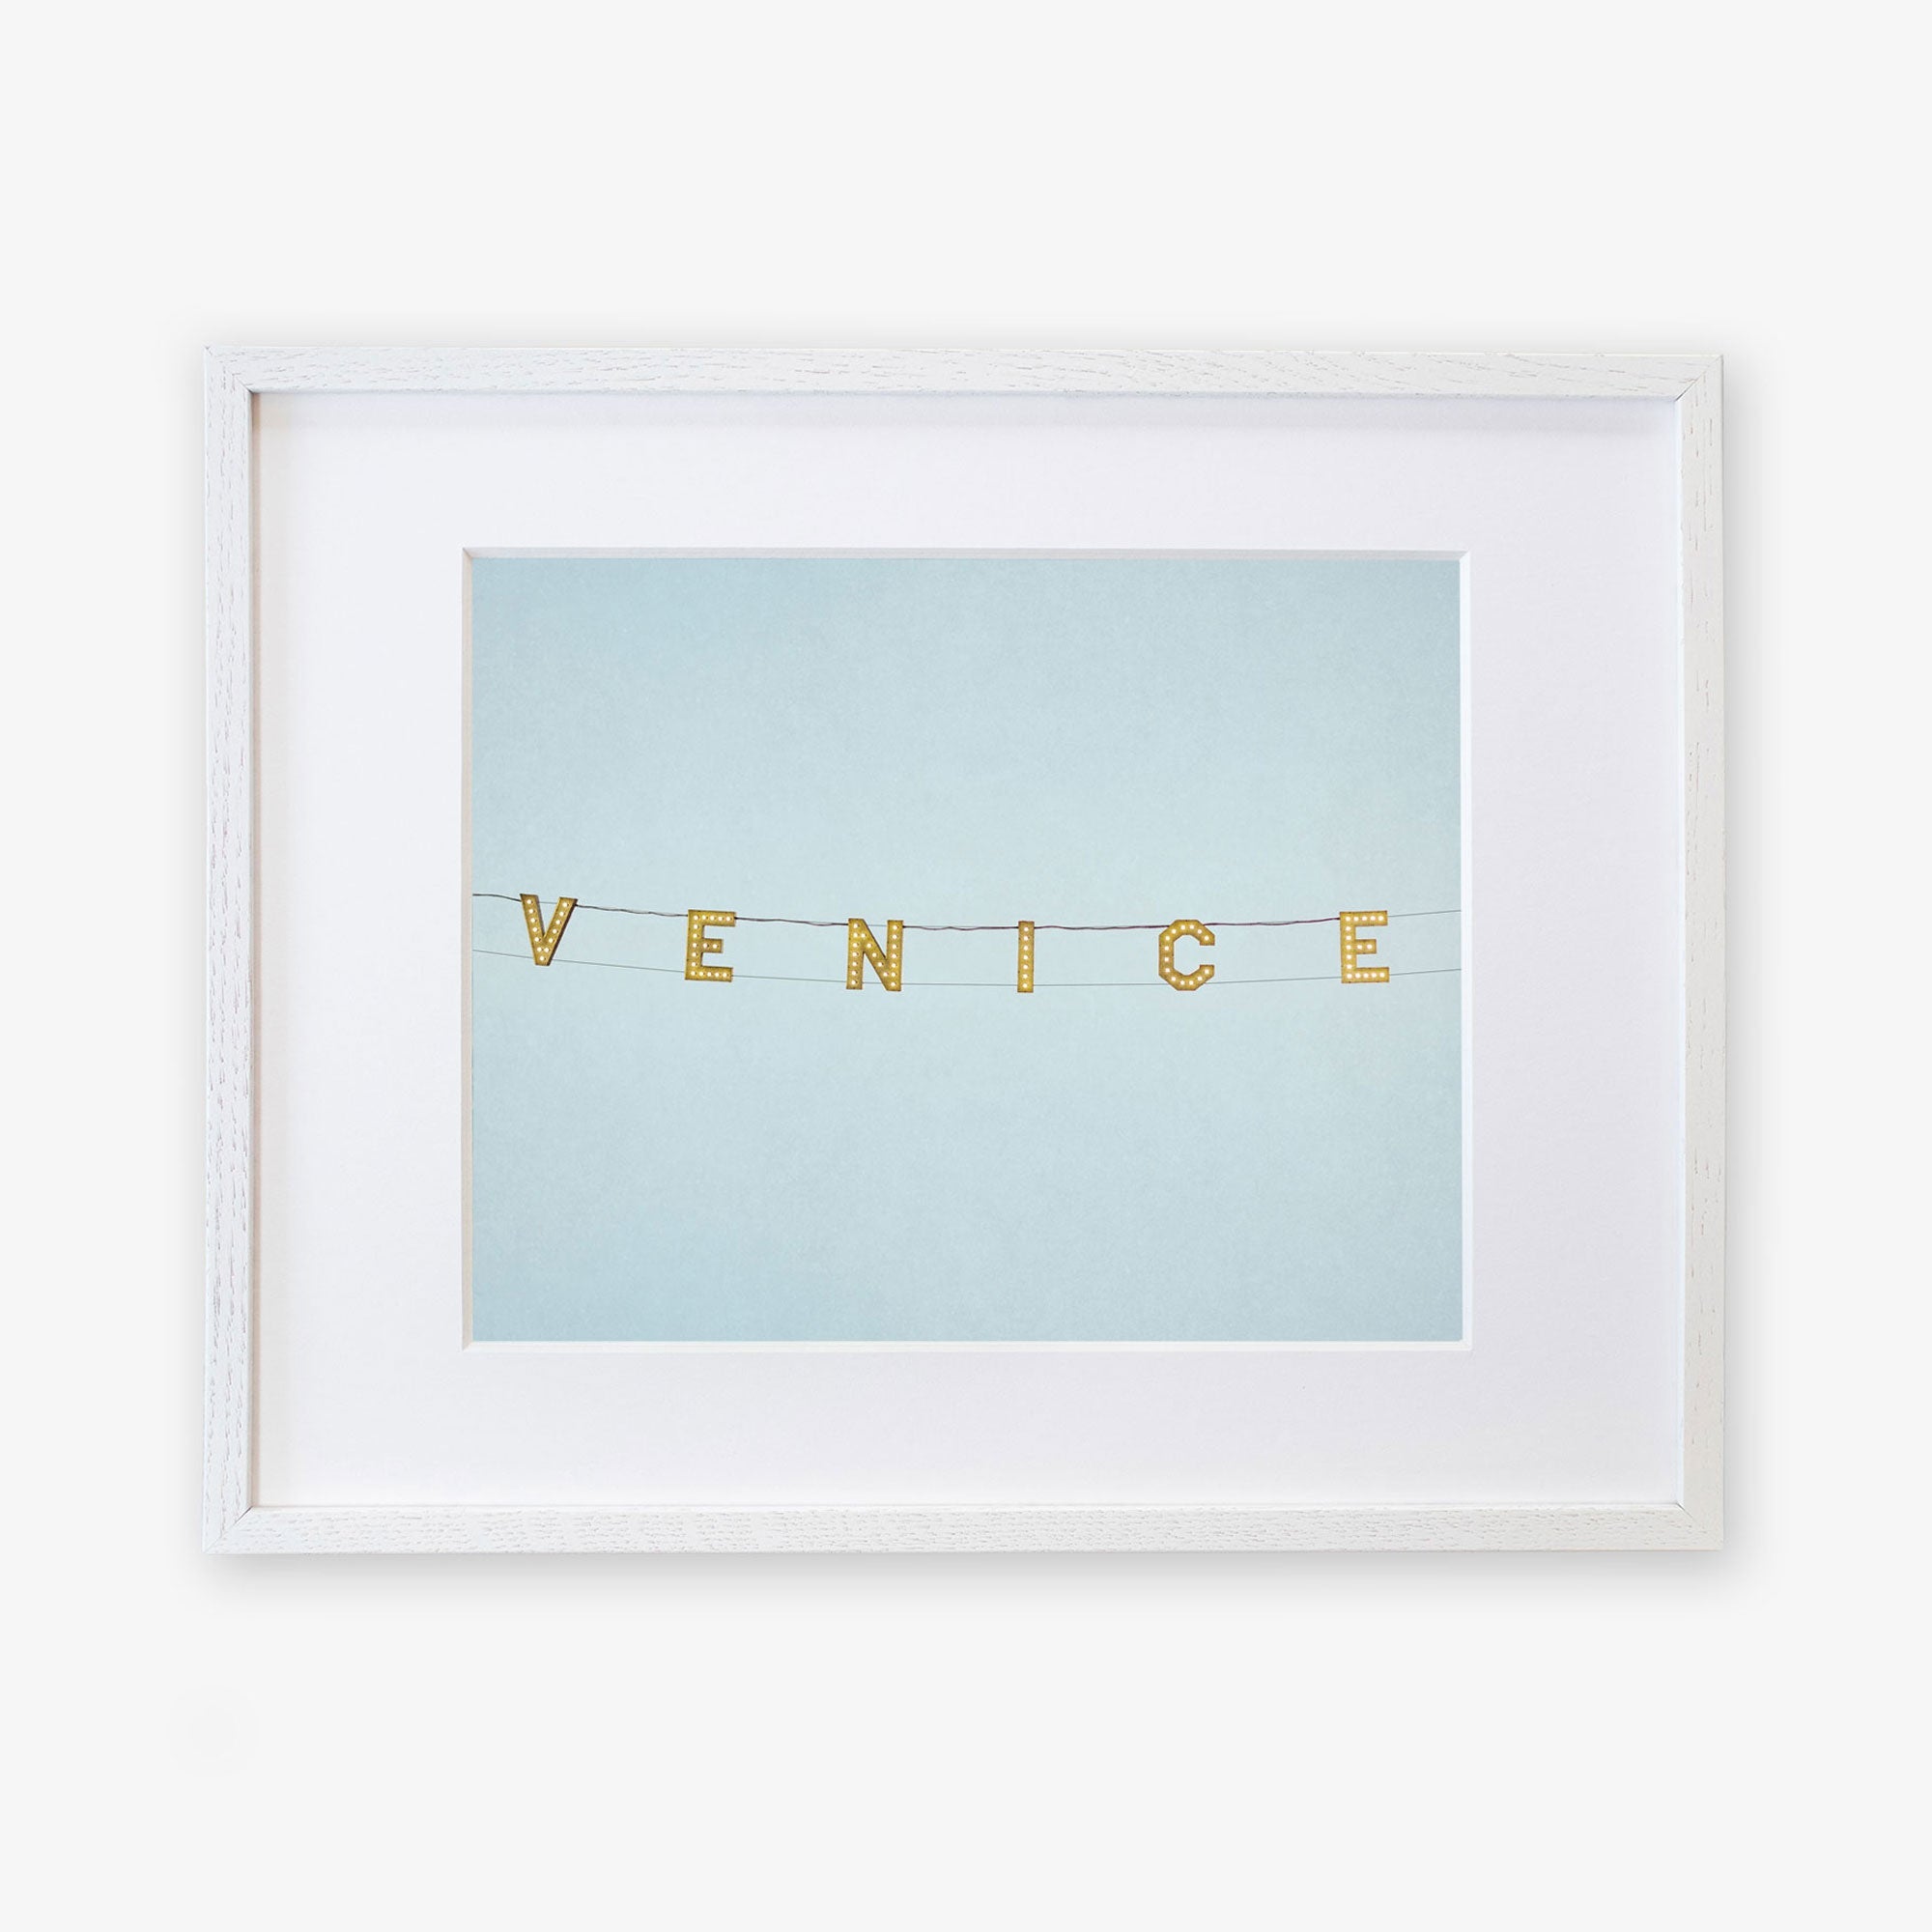 Unframed artwork featuring the Venice Beach Sign Print, 'Blue Venice' spelled out with string and small, square, gold letters against a light blue background, printed on archival photographic paper by Offley Green.